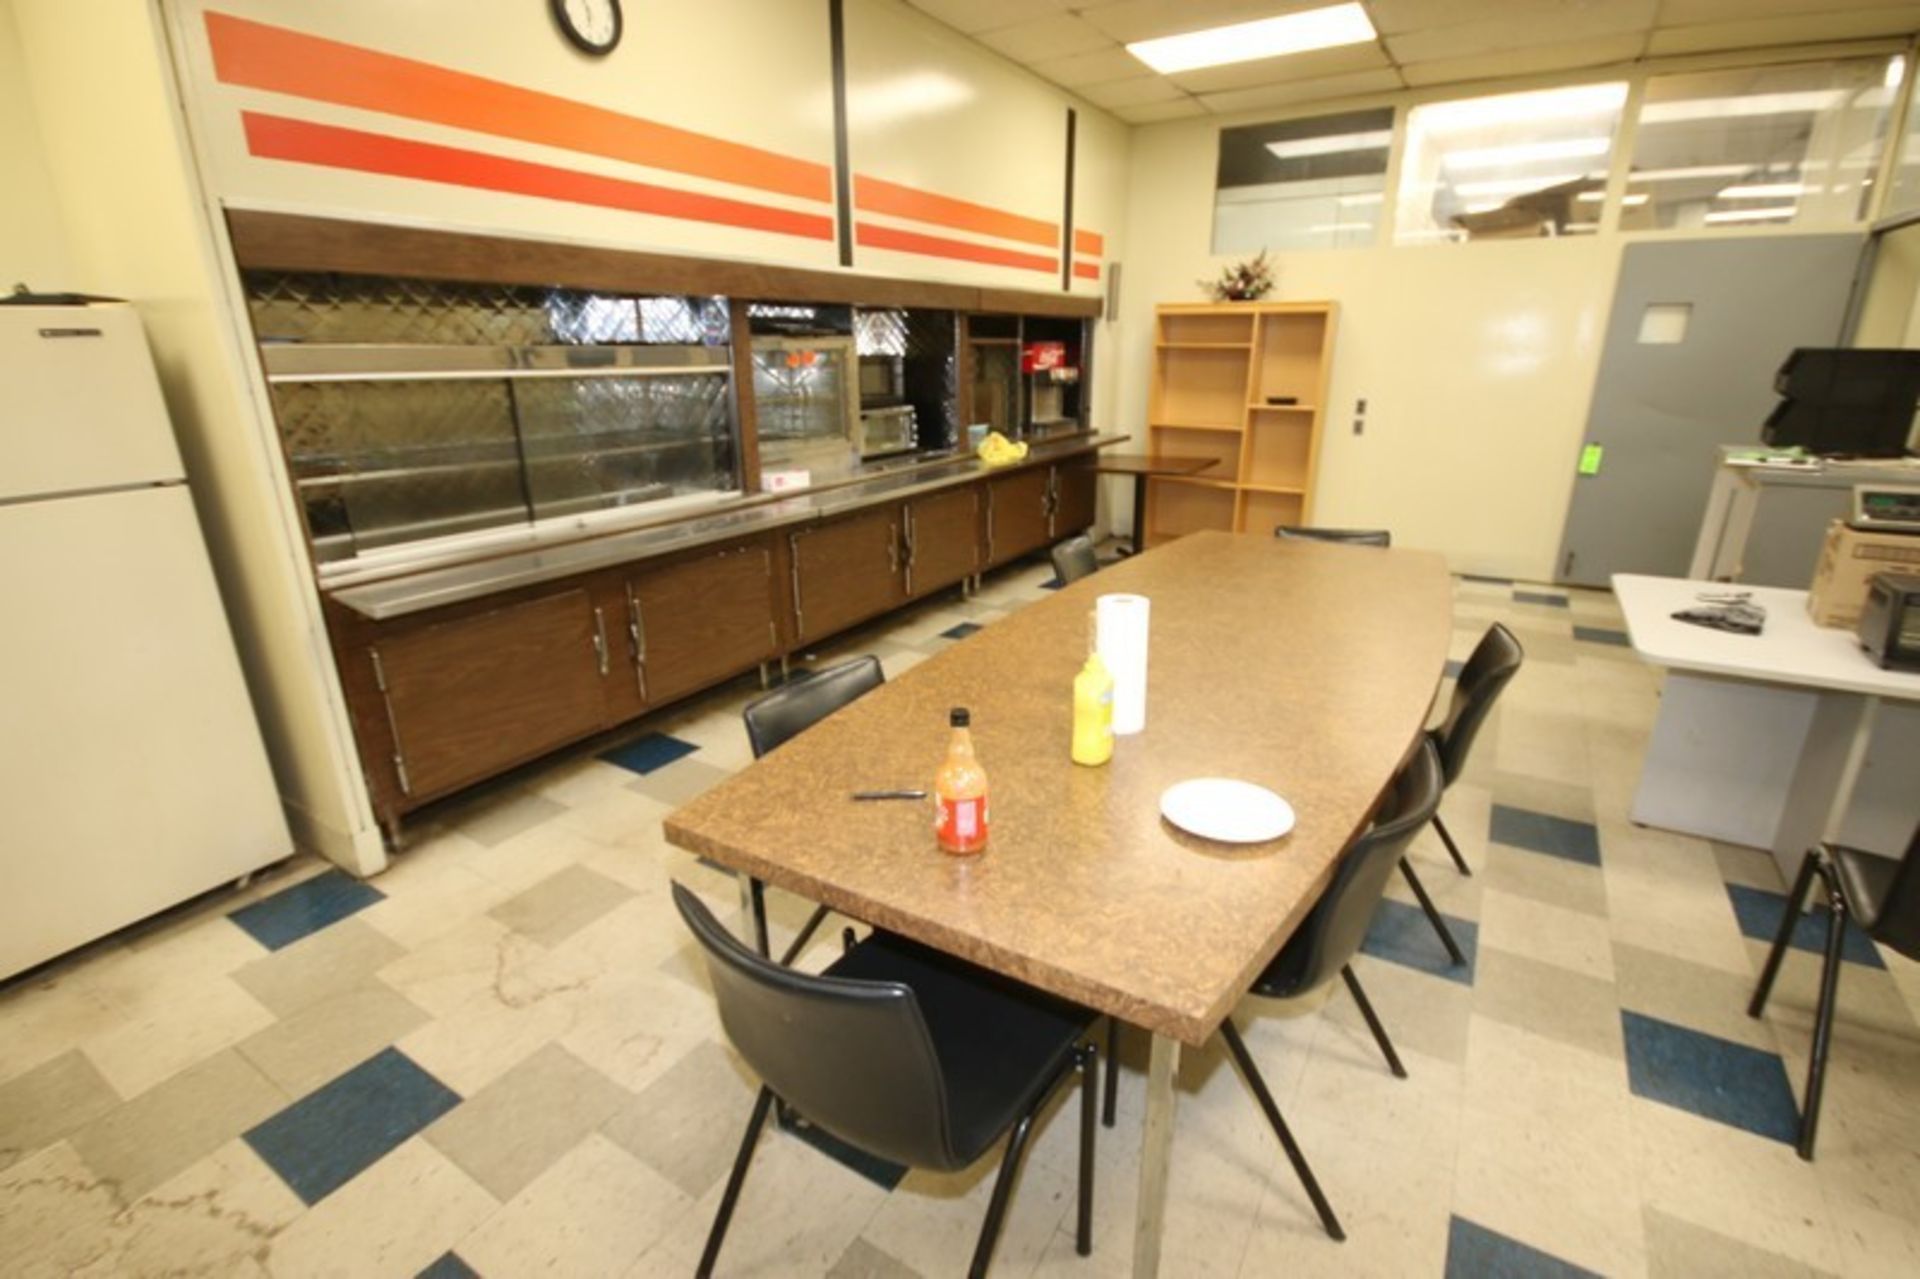 Contents of Break Room, Includes (2) Soda Dispensing Machines, 2-Shelf S/S Warming Station,